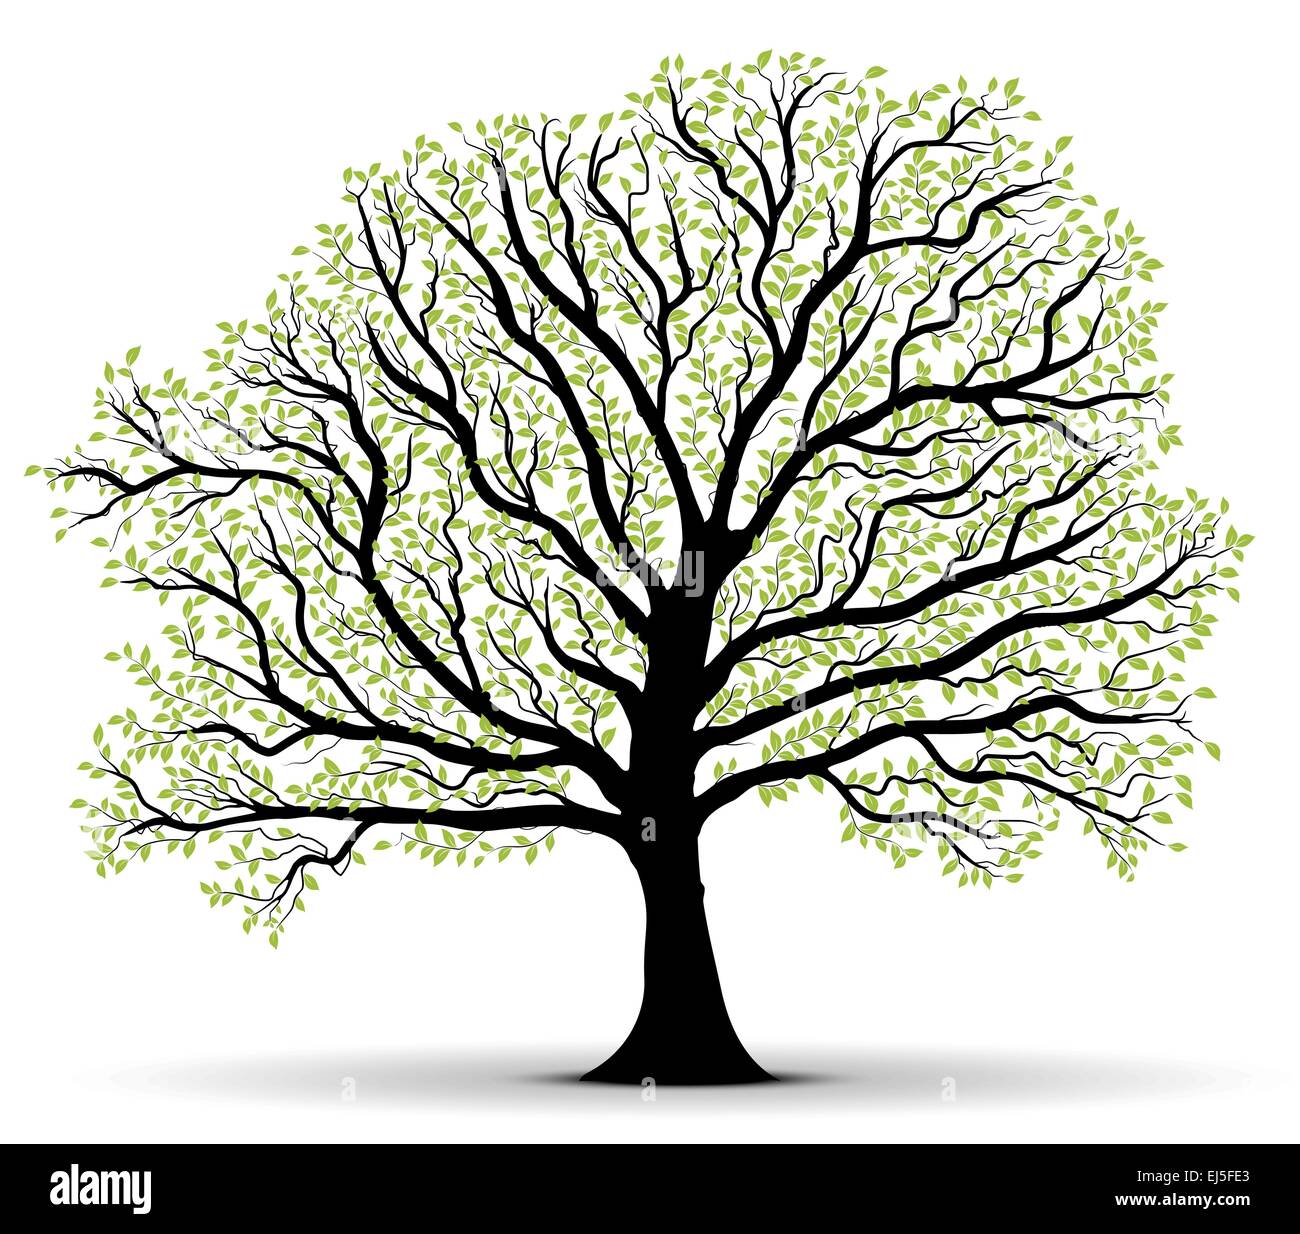 Old vector tree with black trunk and green foliage over white background Stock Vector